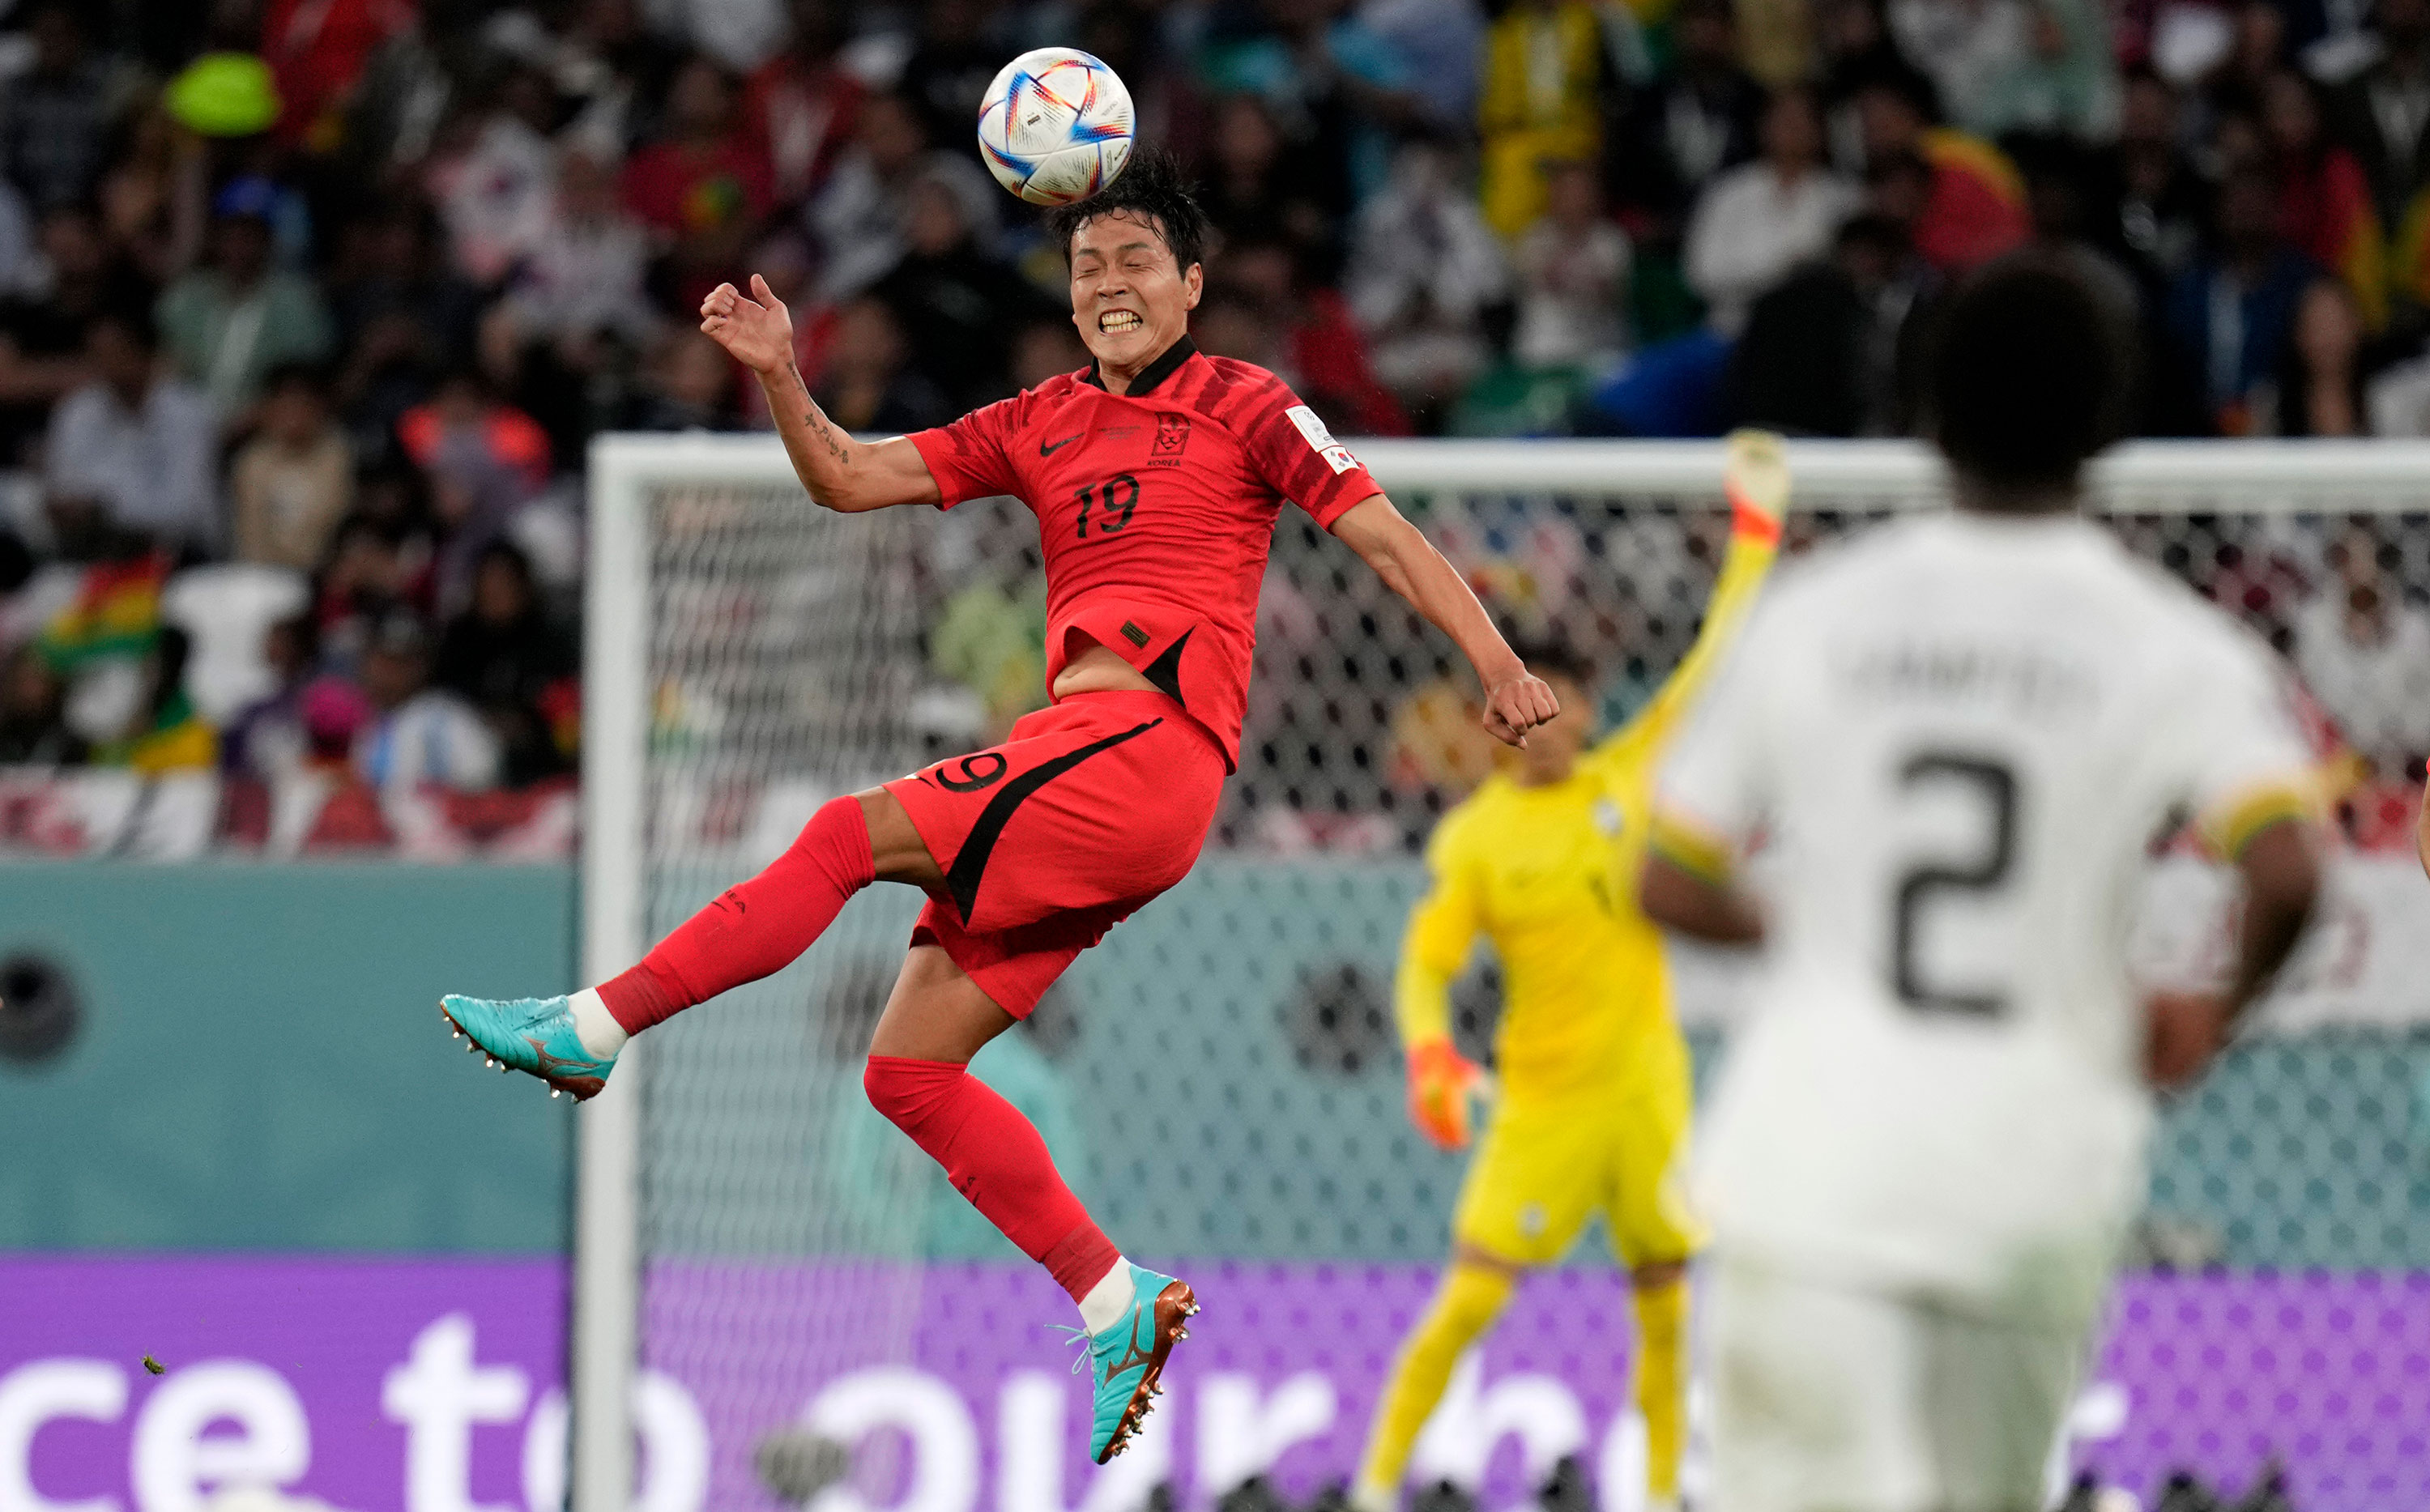 South Korea's Kim Young-gwon heads the ball during the match against Ghana on Monday.